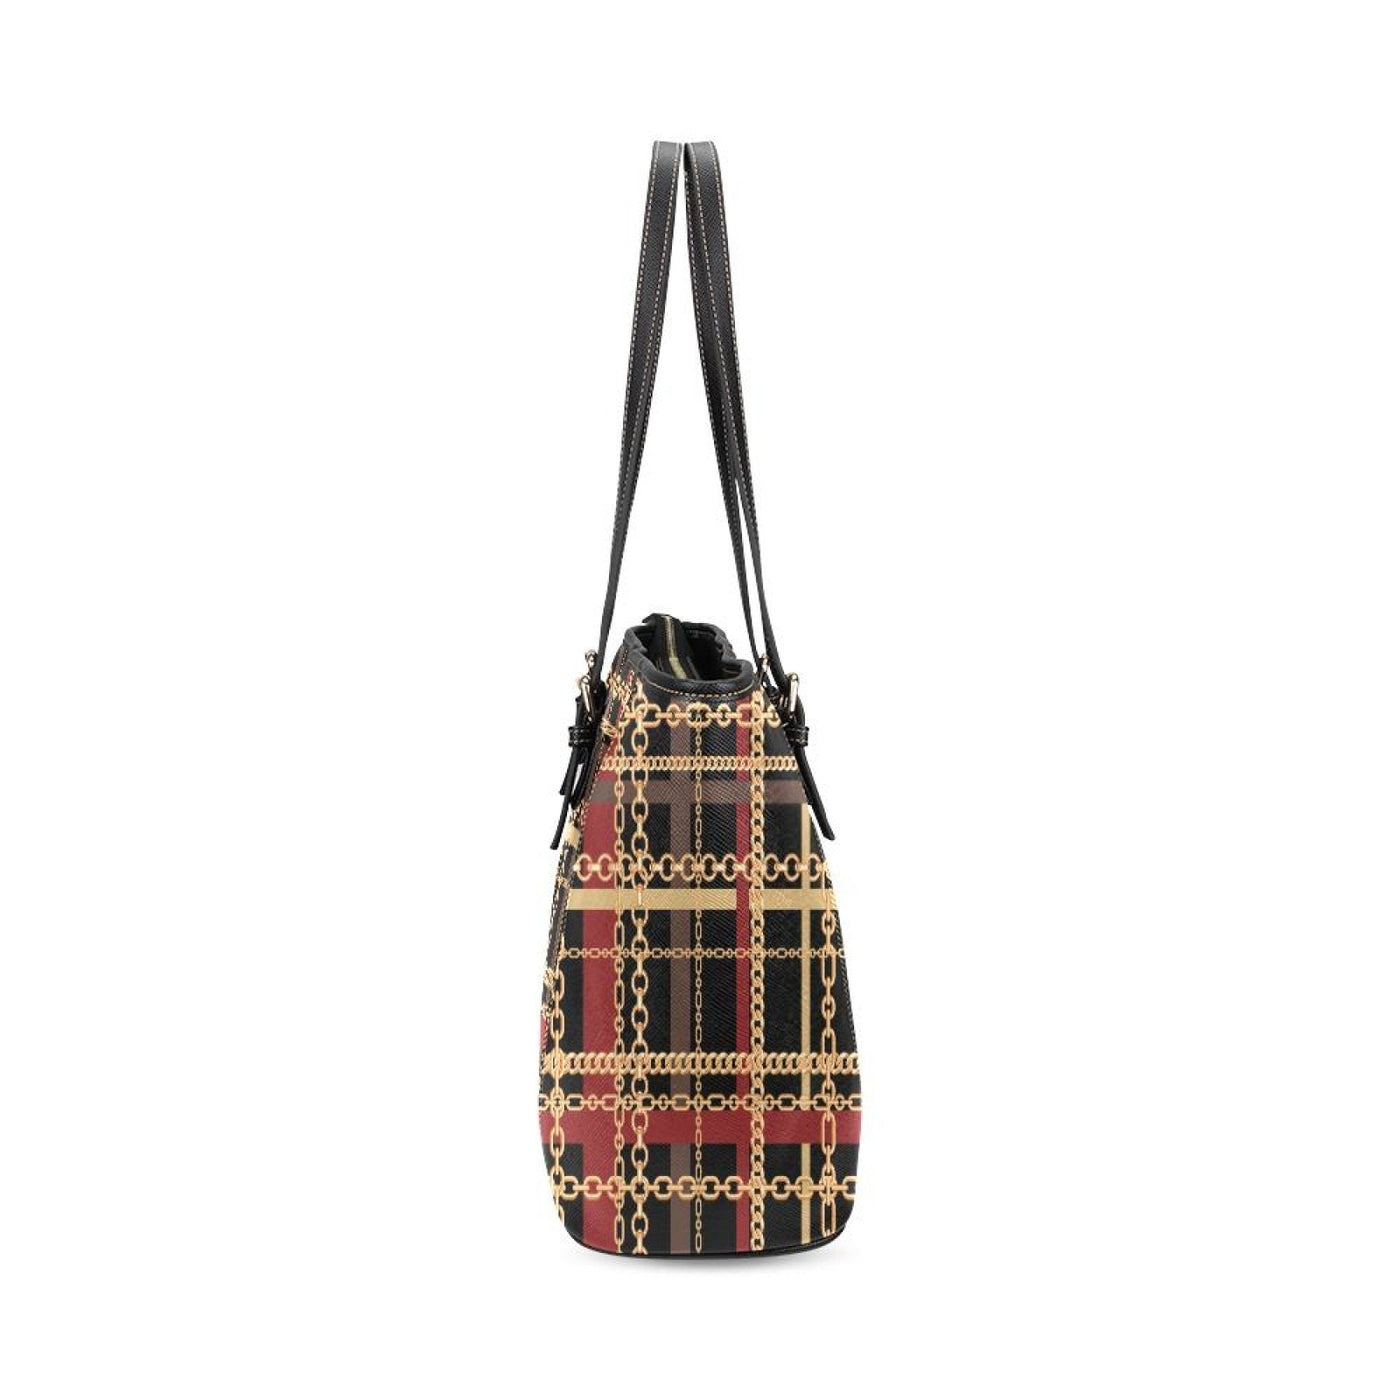 Large Leather Tote Shoulder Bag - Black Red And Gold Chain Link Pattern